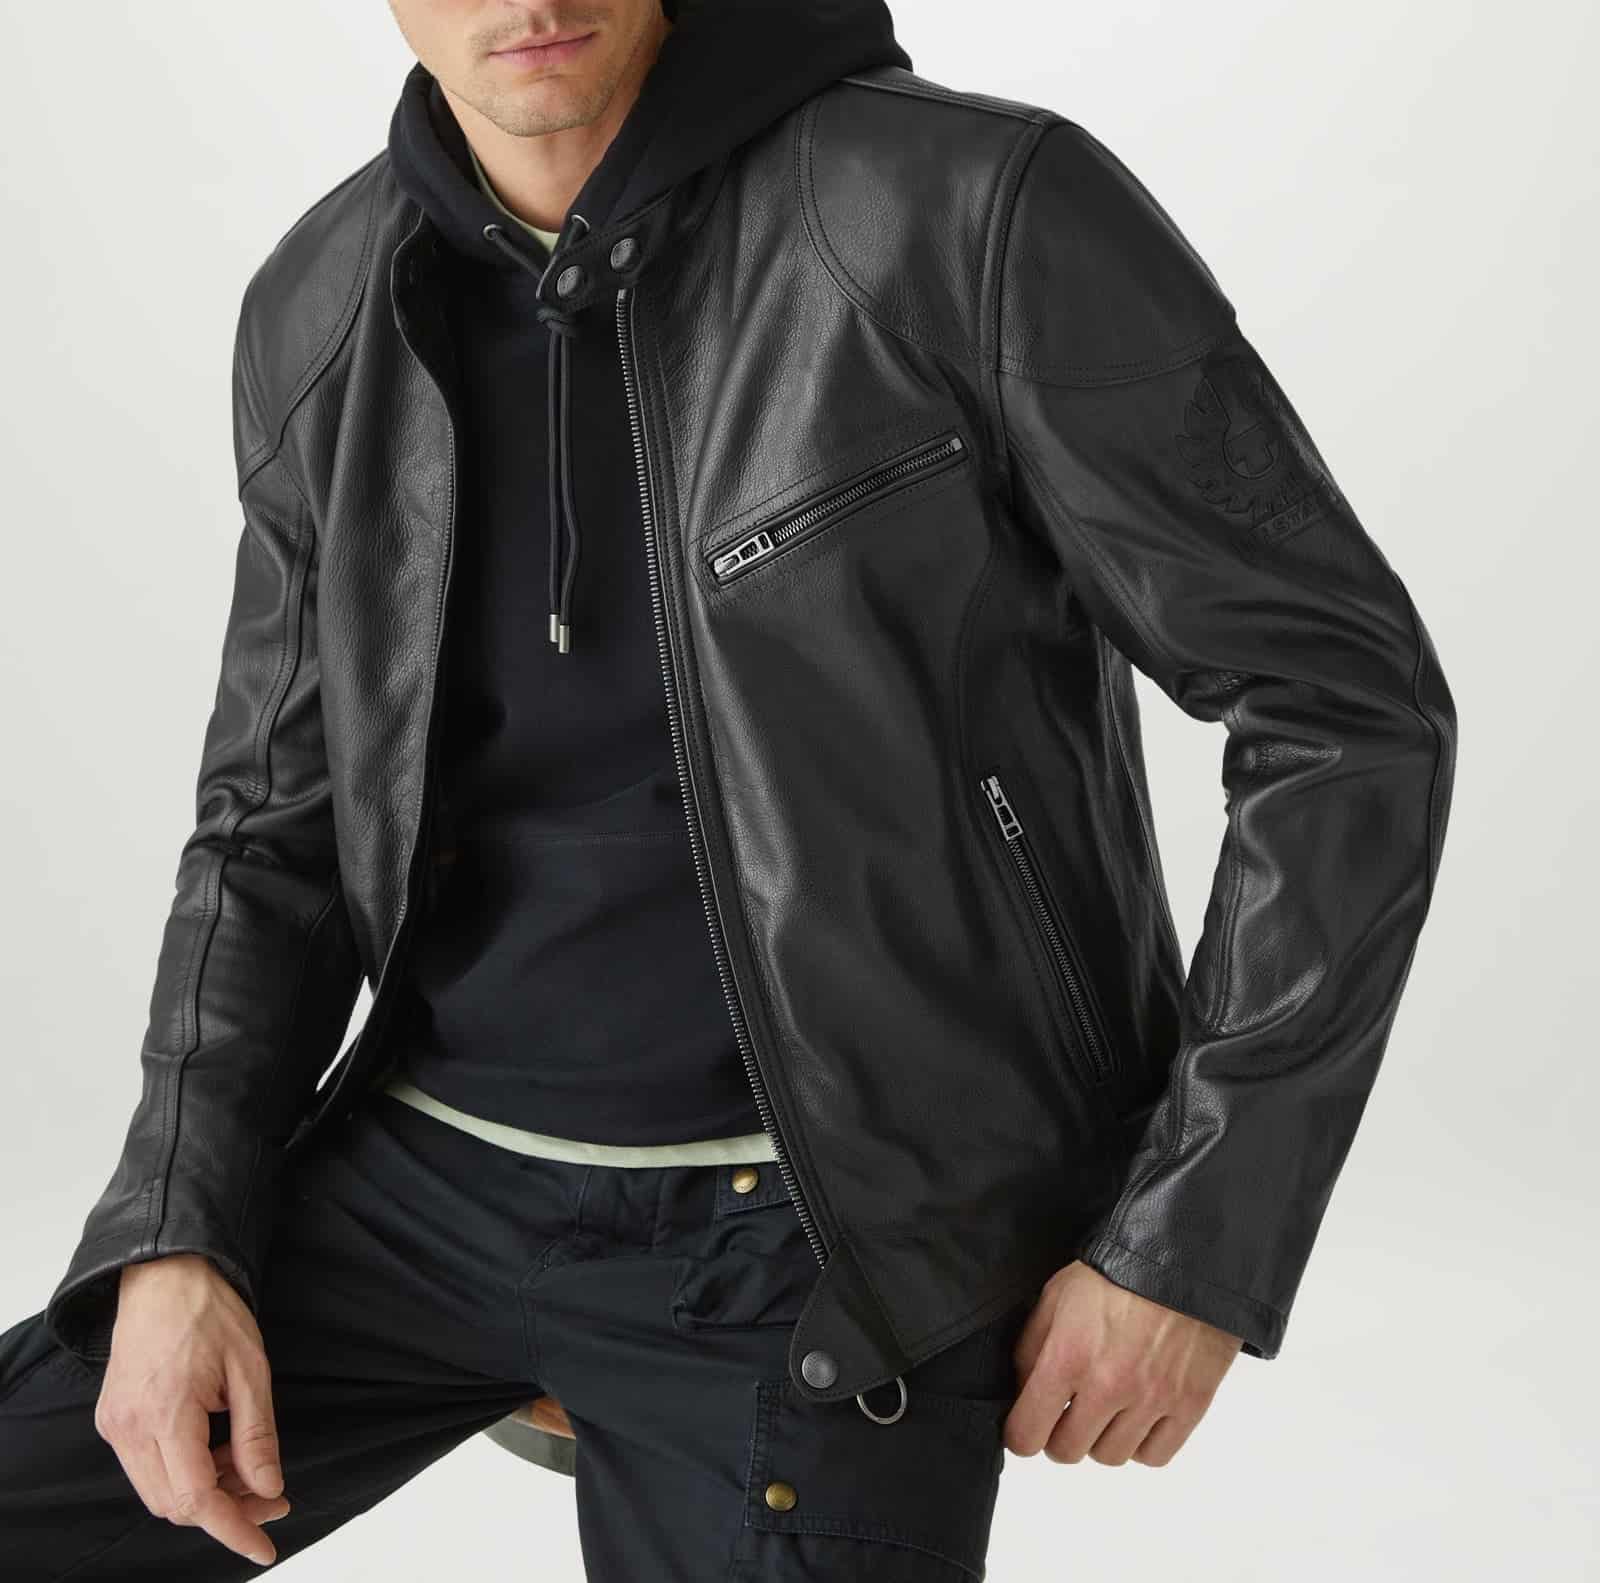 image of a man wearing a black leather jacket over a black hoodie